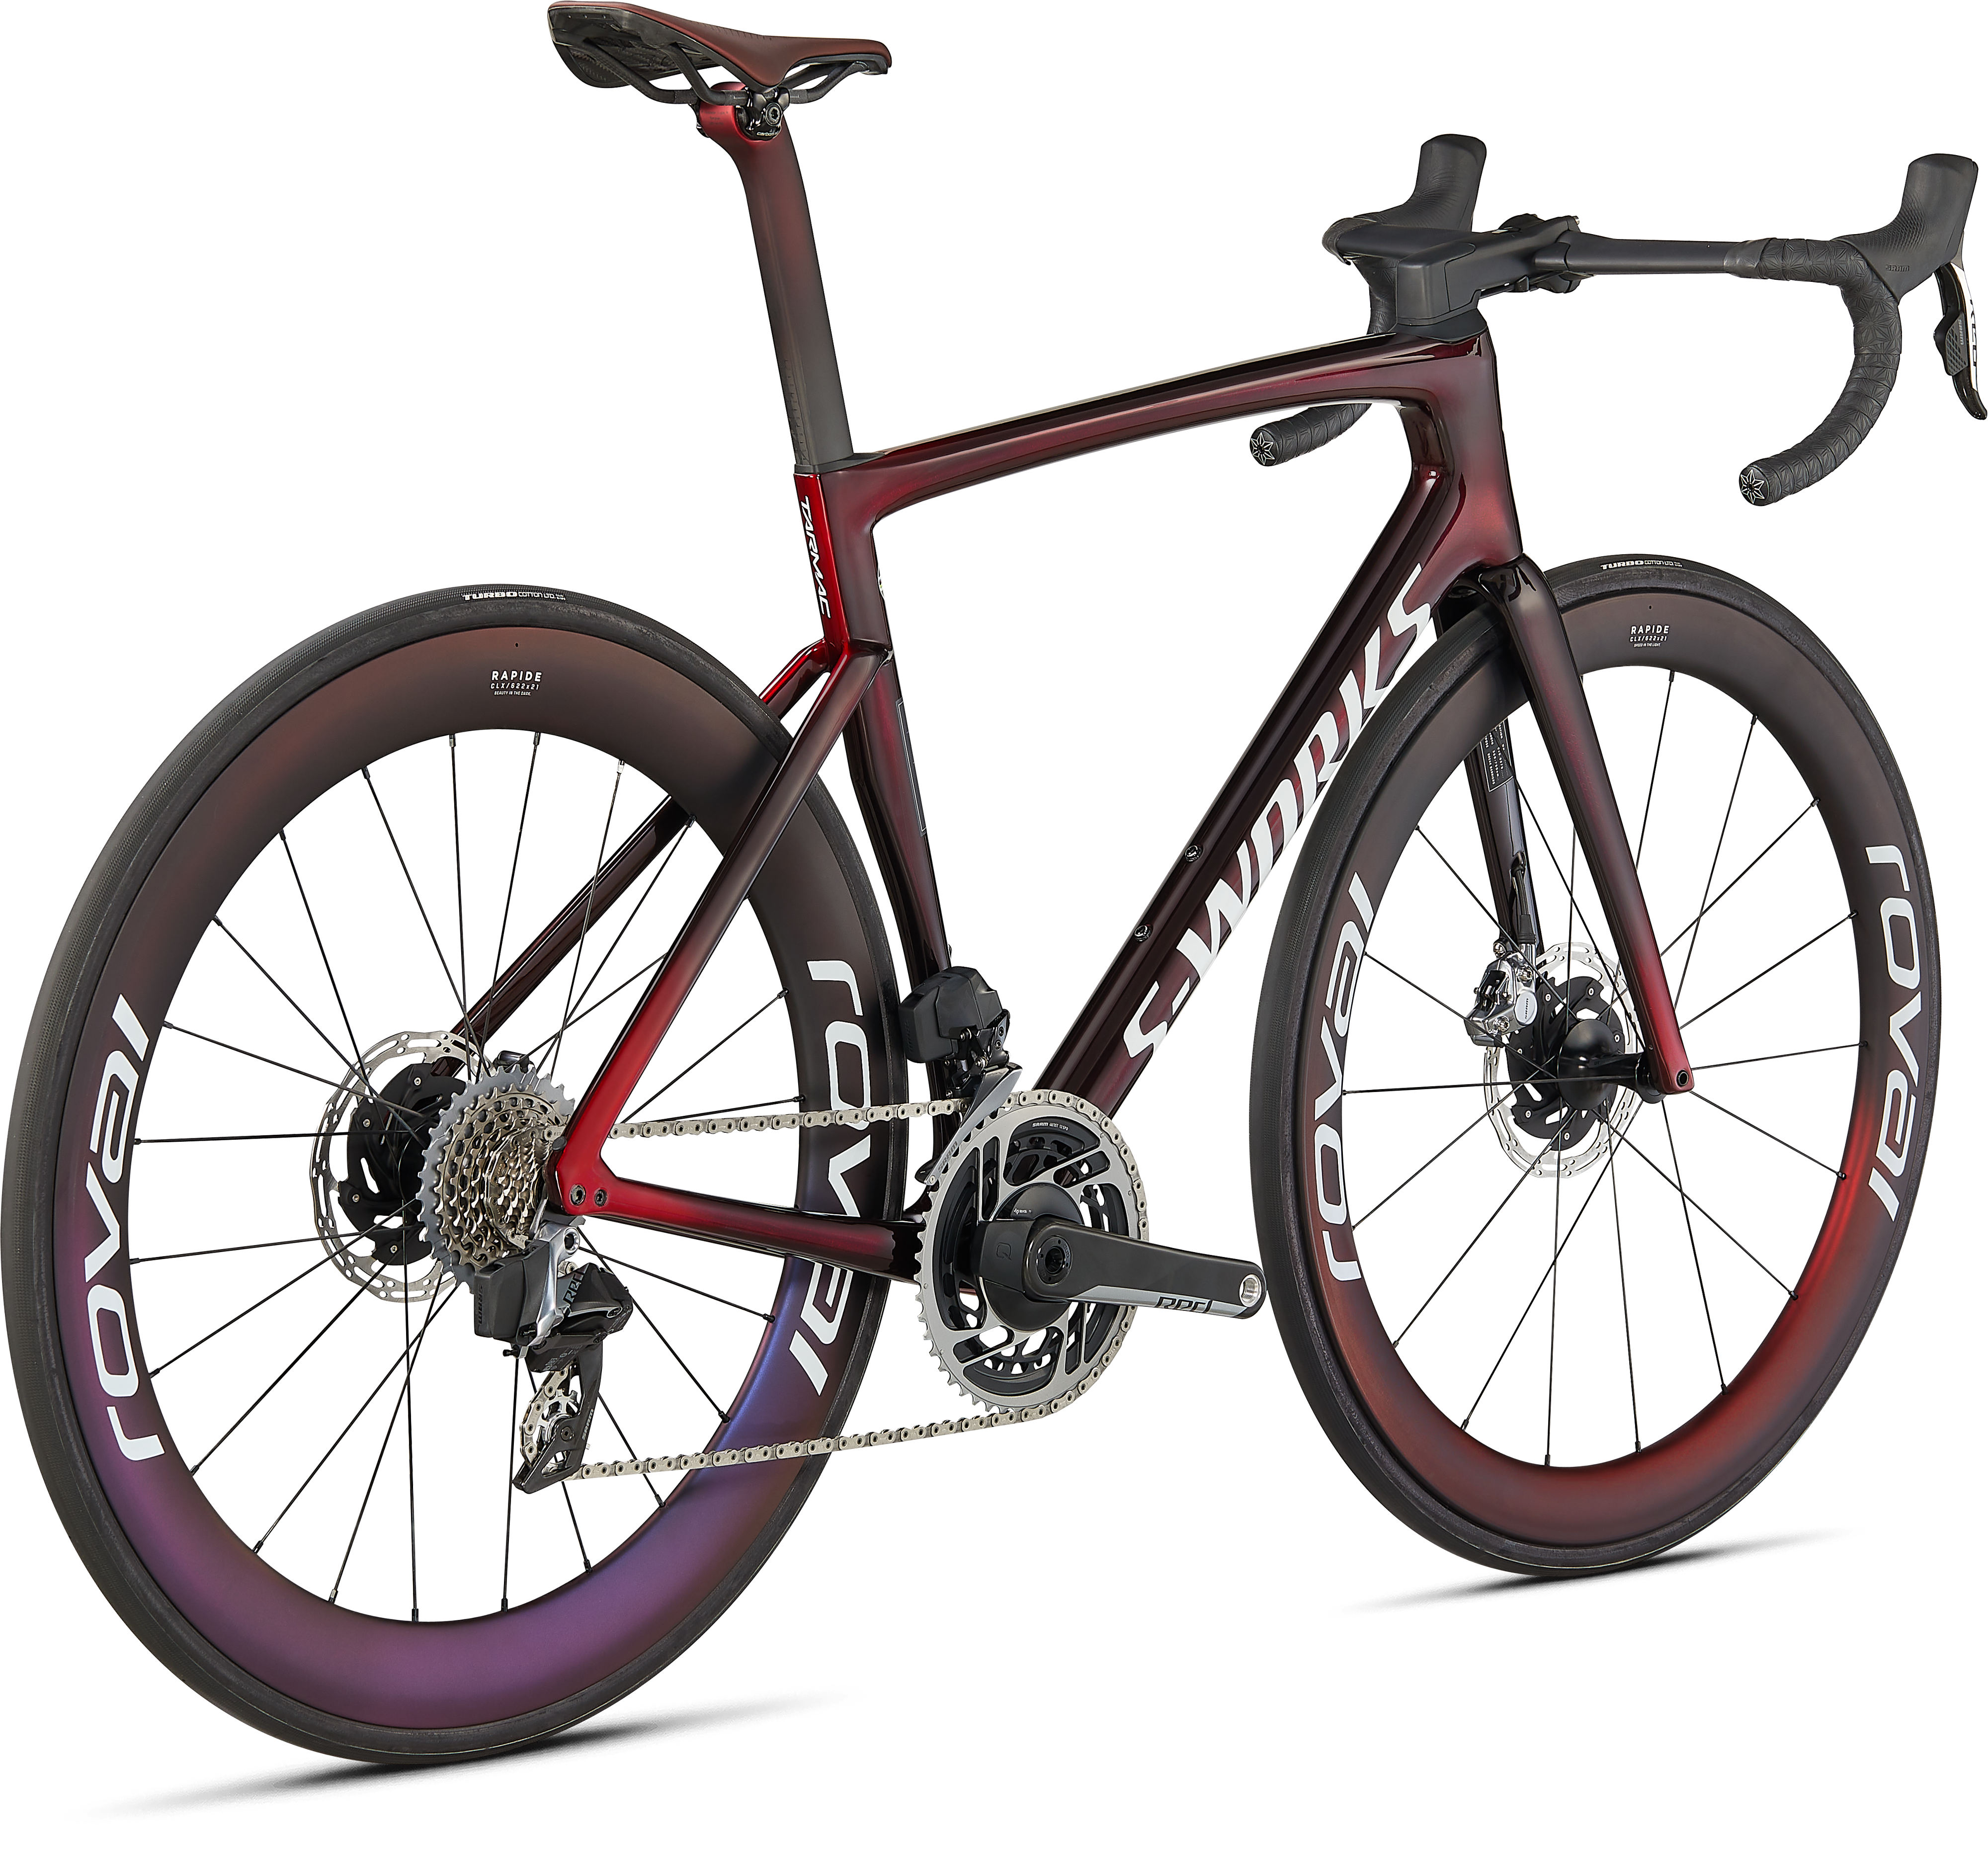 S-Works Evade - Speed of Light Collection